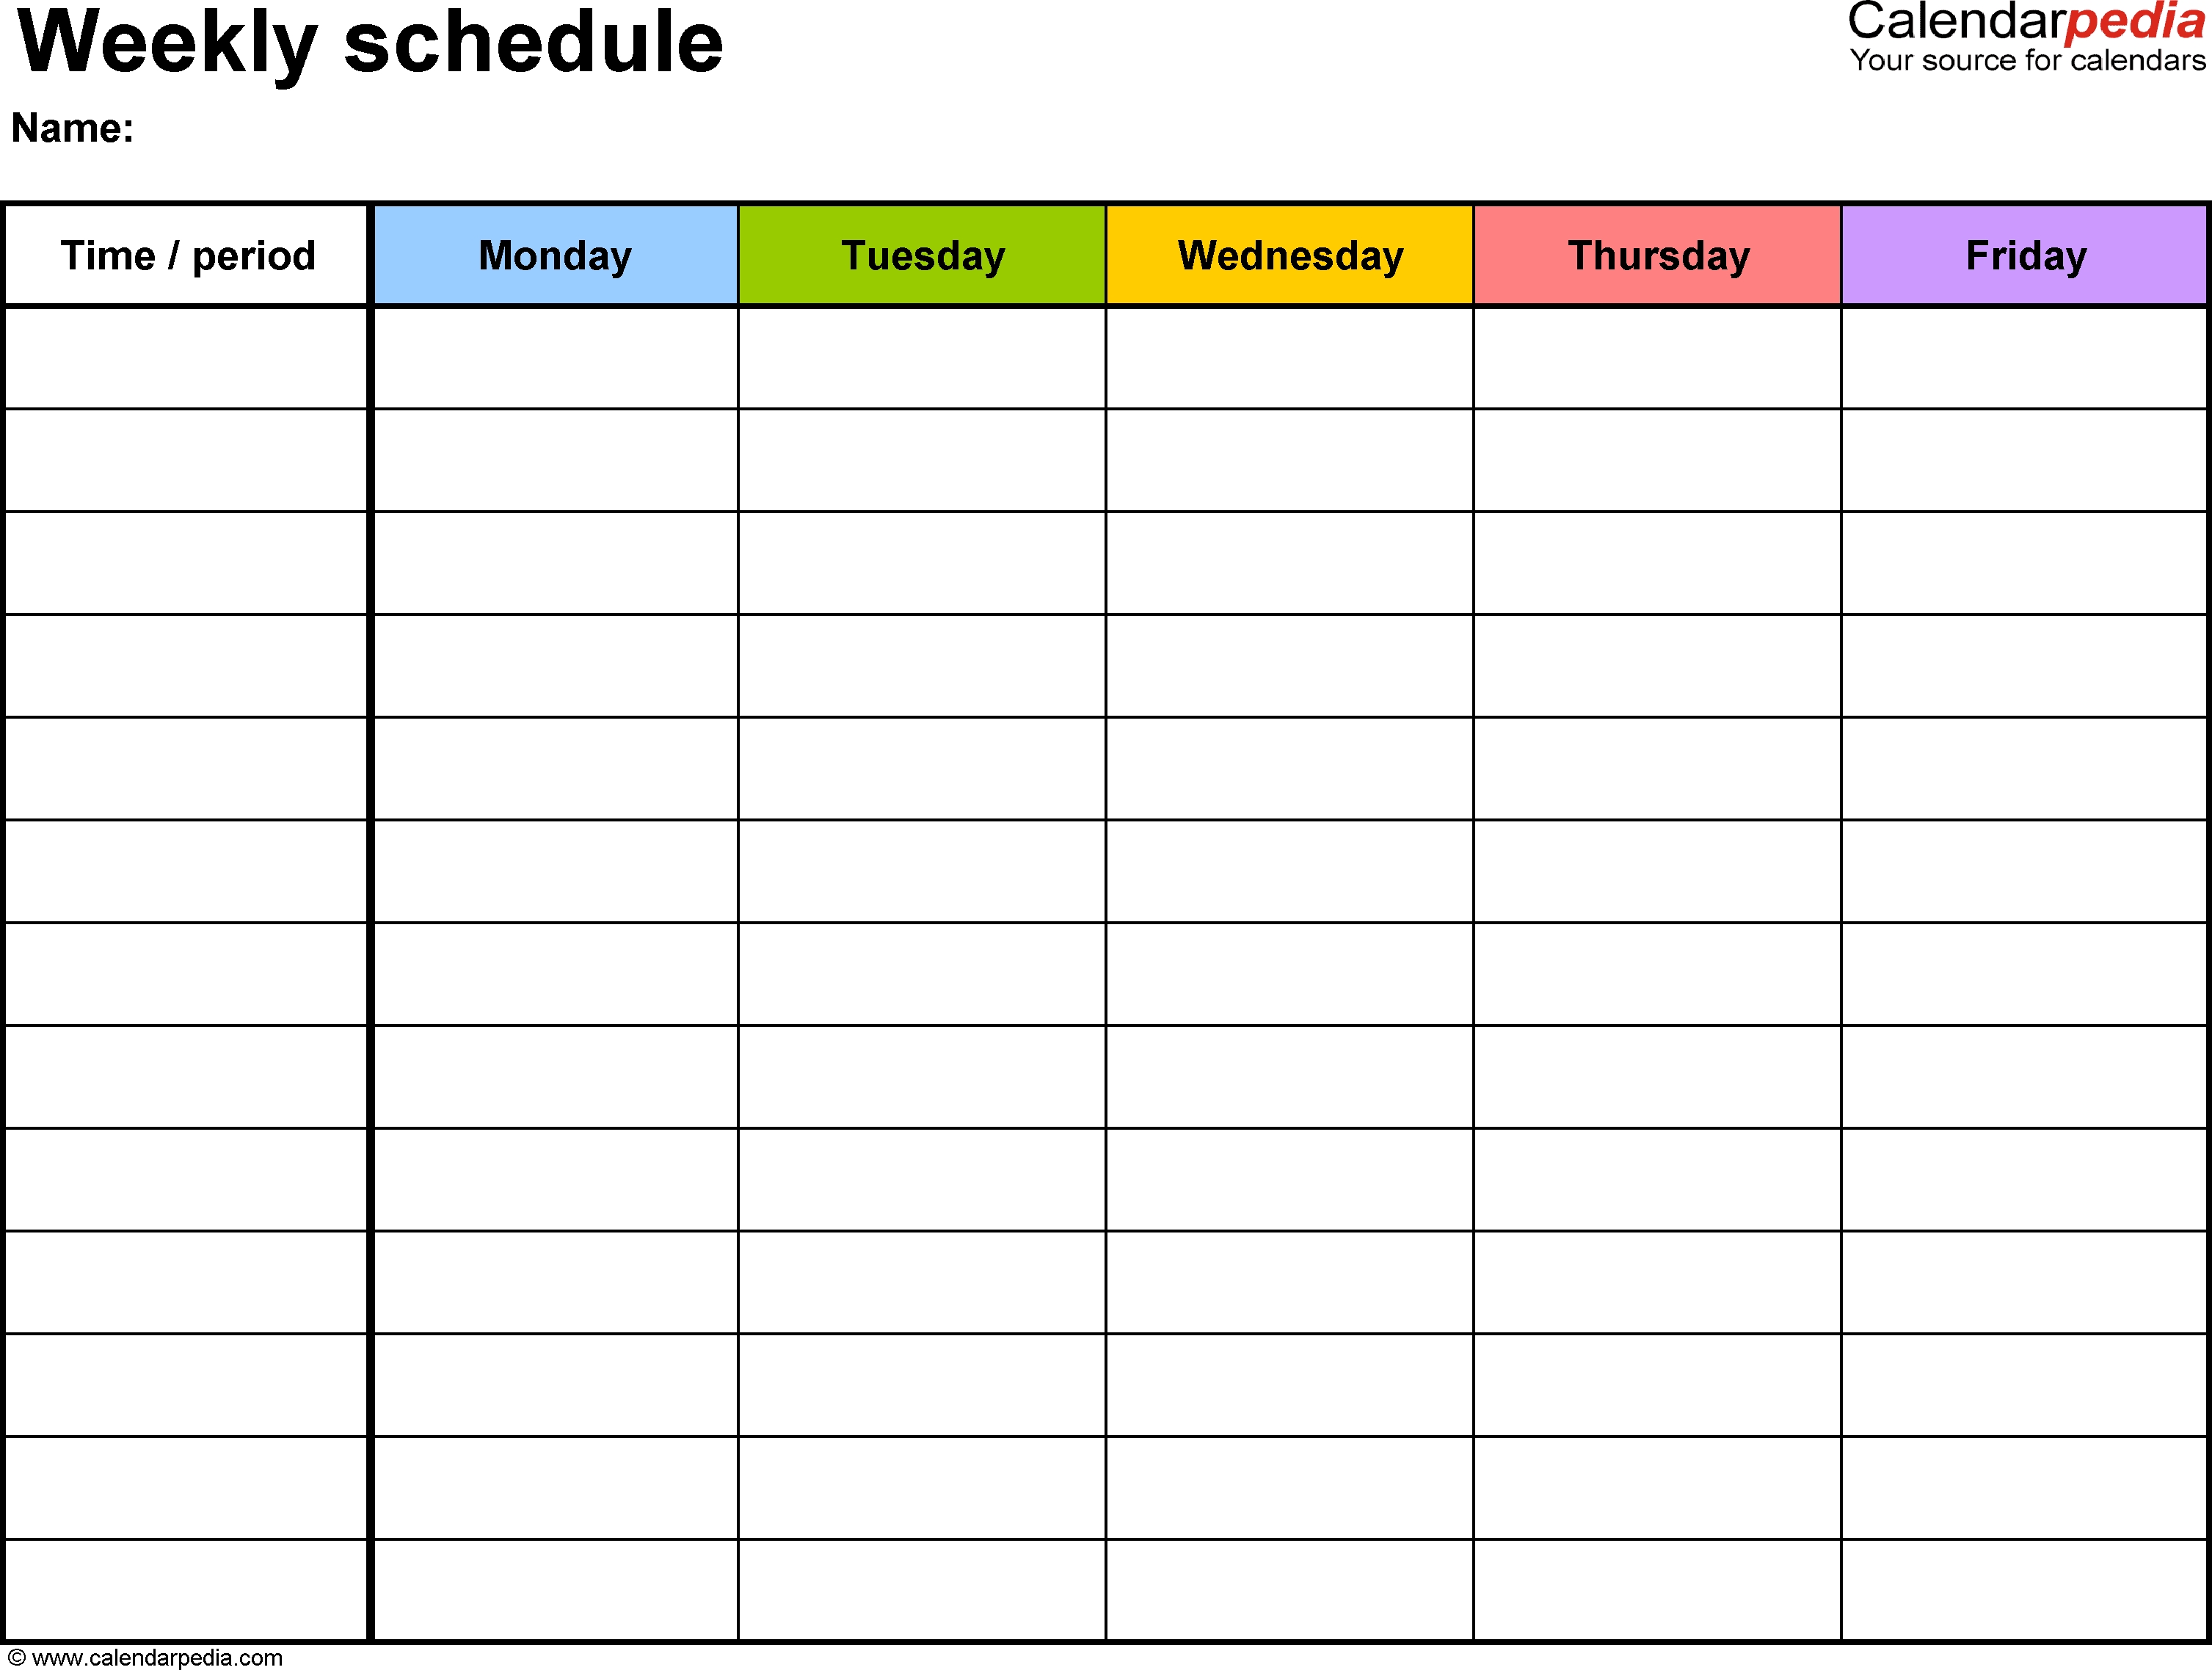 Weekly Schedule Template For Word Version 1: Landscape, 1